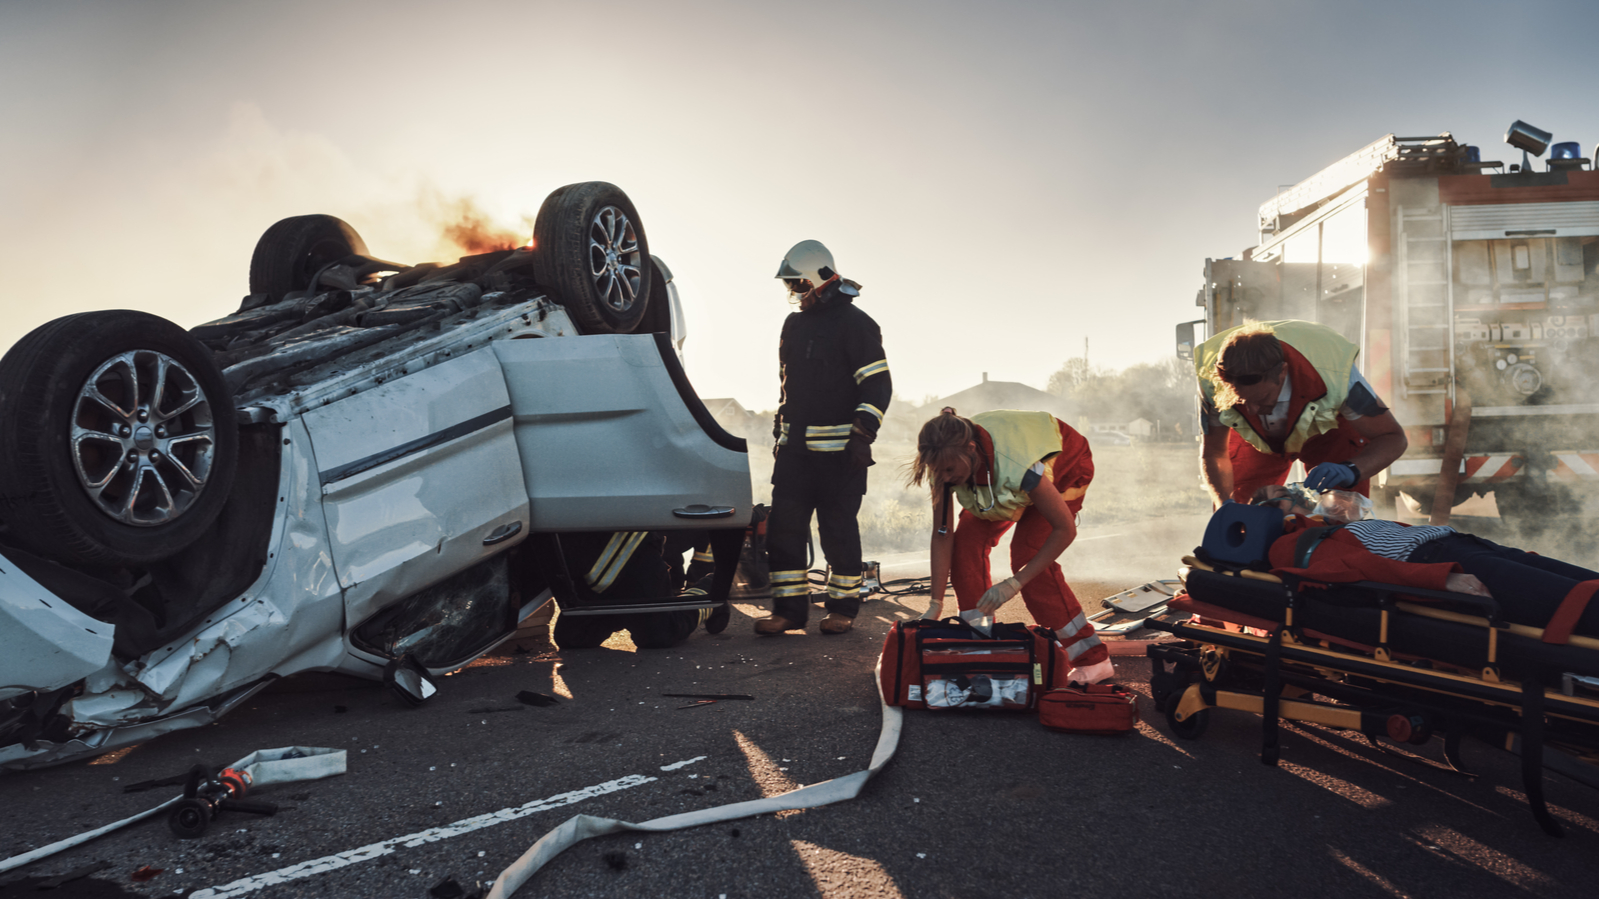 Truck Accident Law Firm in Bloomington, IL | Bloomington, IL Truck Accident Lawyer | Burger Law